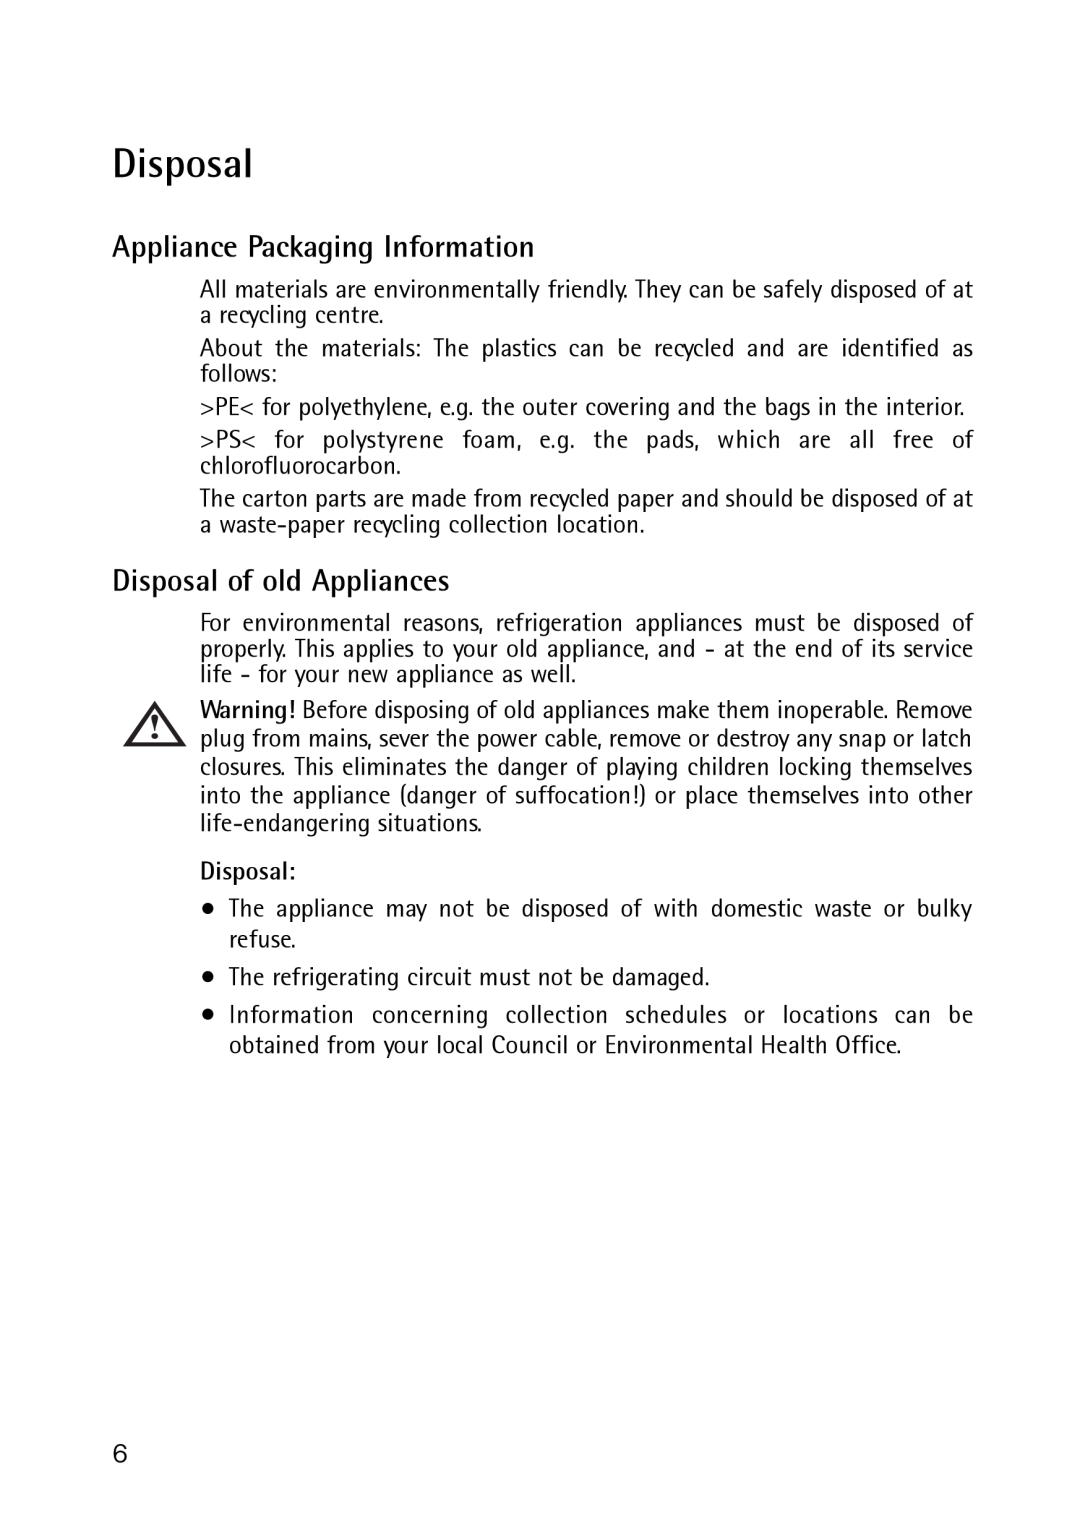 Electrolux 189 GT, 261 GT operating instructions Appliance Packaging Information, Disposal of old Appliances 